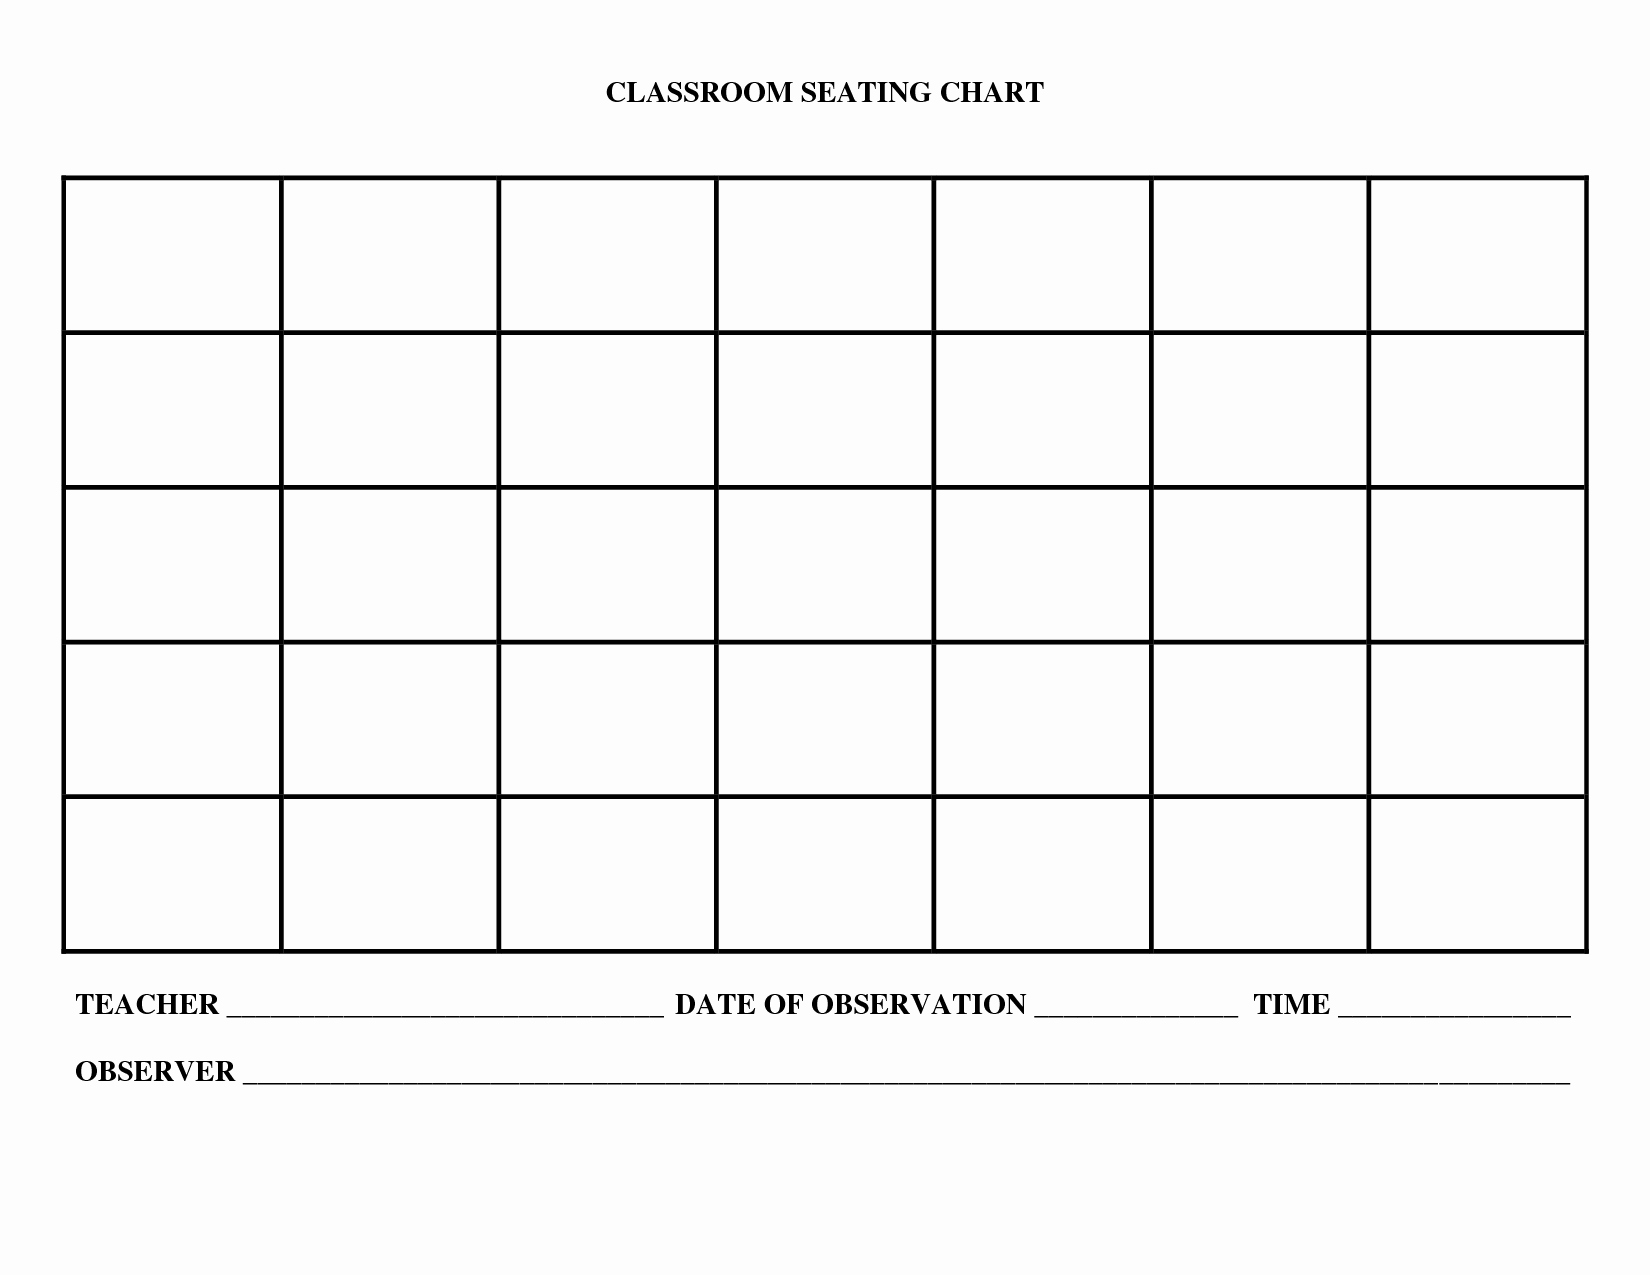 Seating Charts Templates for Classrooms Unique Classroom Seating Chart Templates Portablegasgrillweber